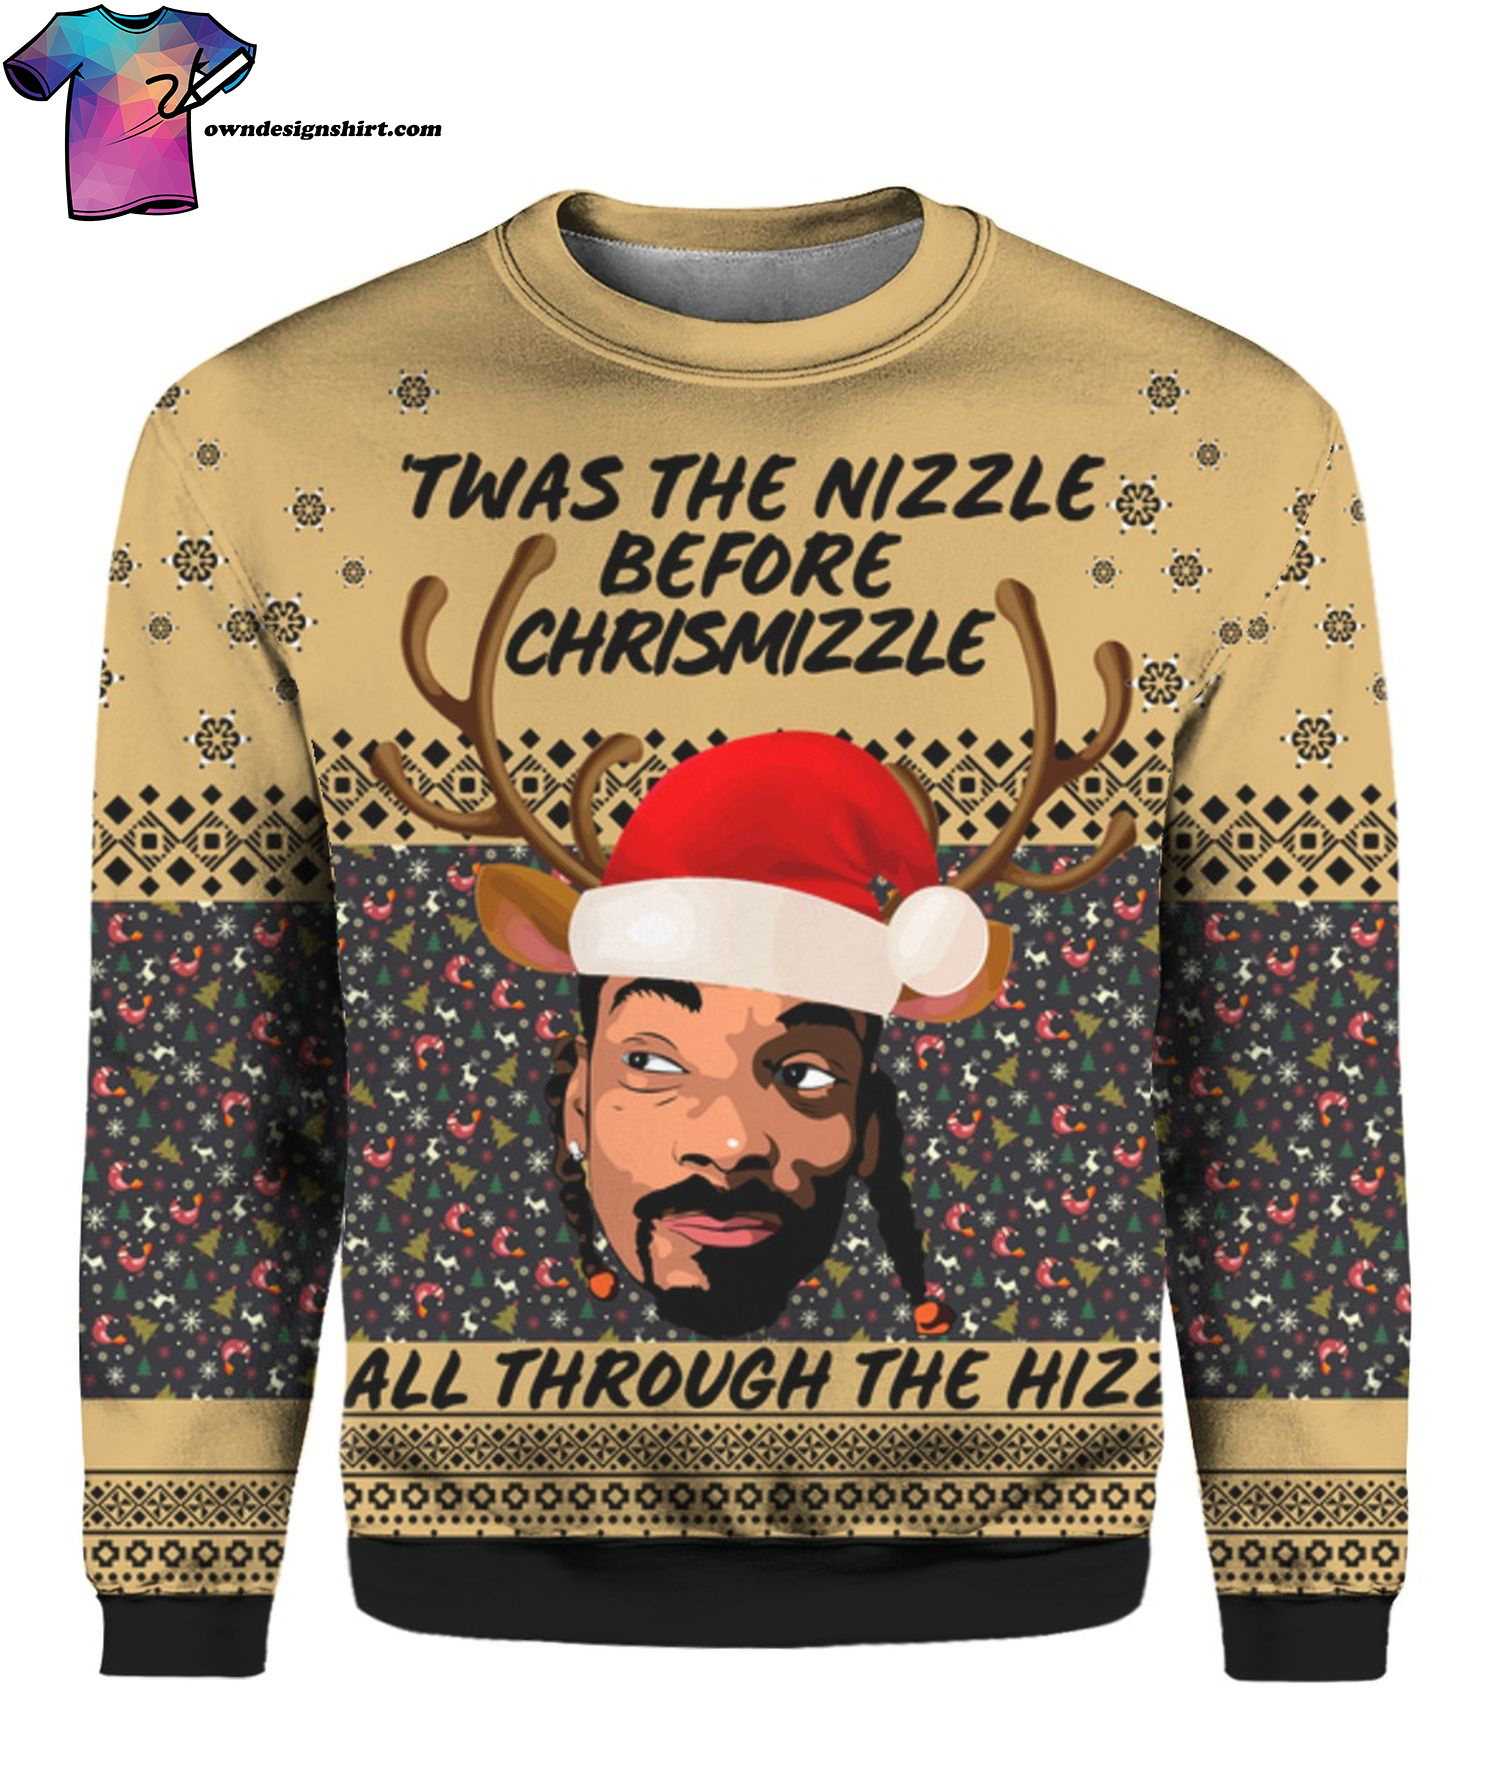 Snoop Dogg Twas The Nizzle Before Chrismizzle Full Print Ugly Christmas Sweater